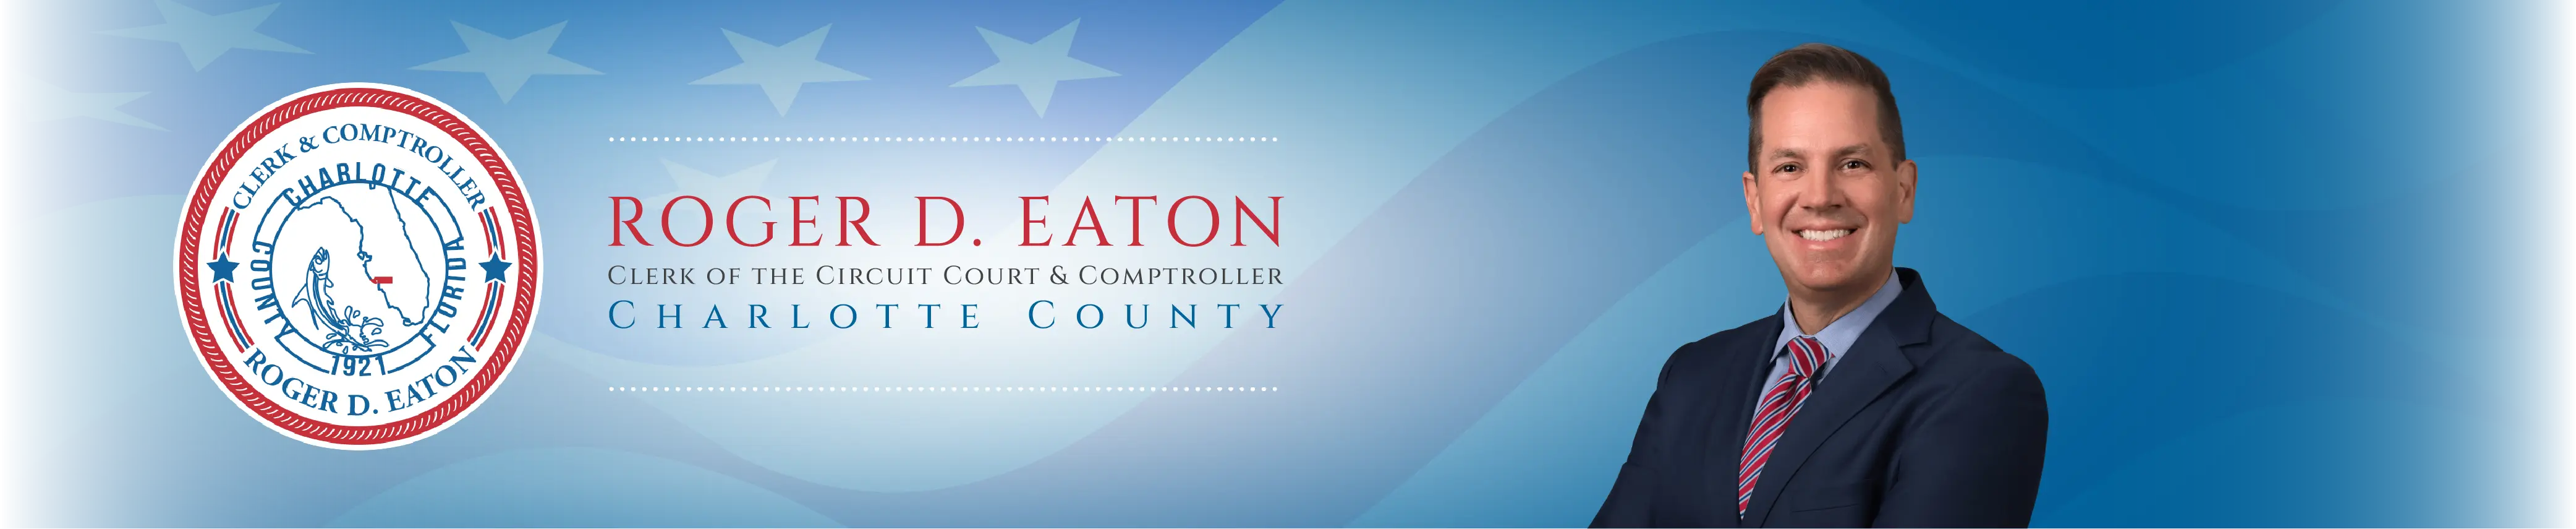 Roger D. Eaton, Clerk of the Circuit Court and County Comptroller Banner